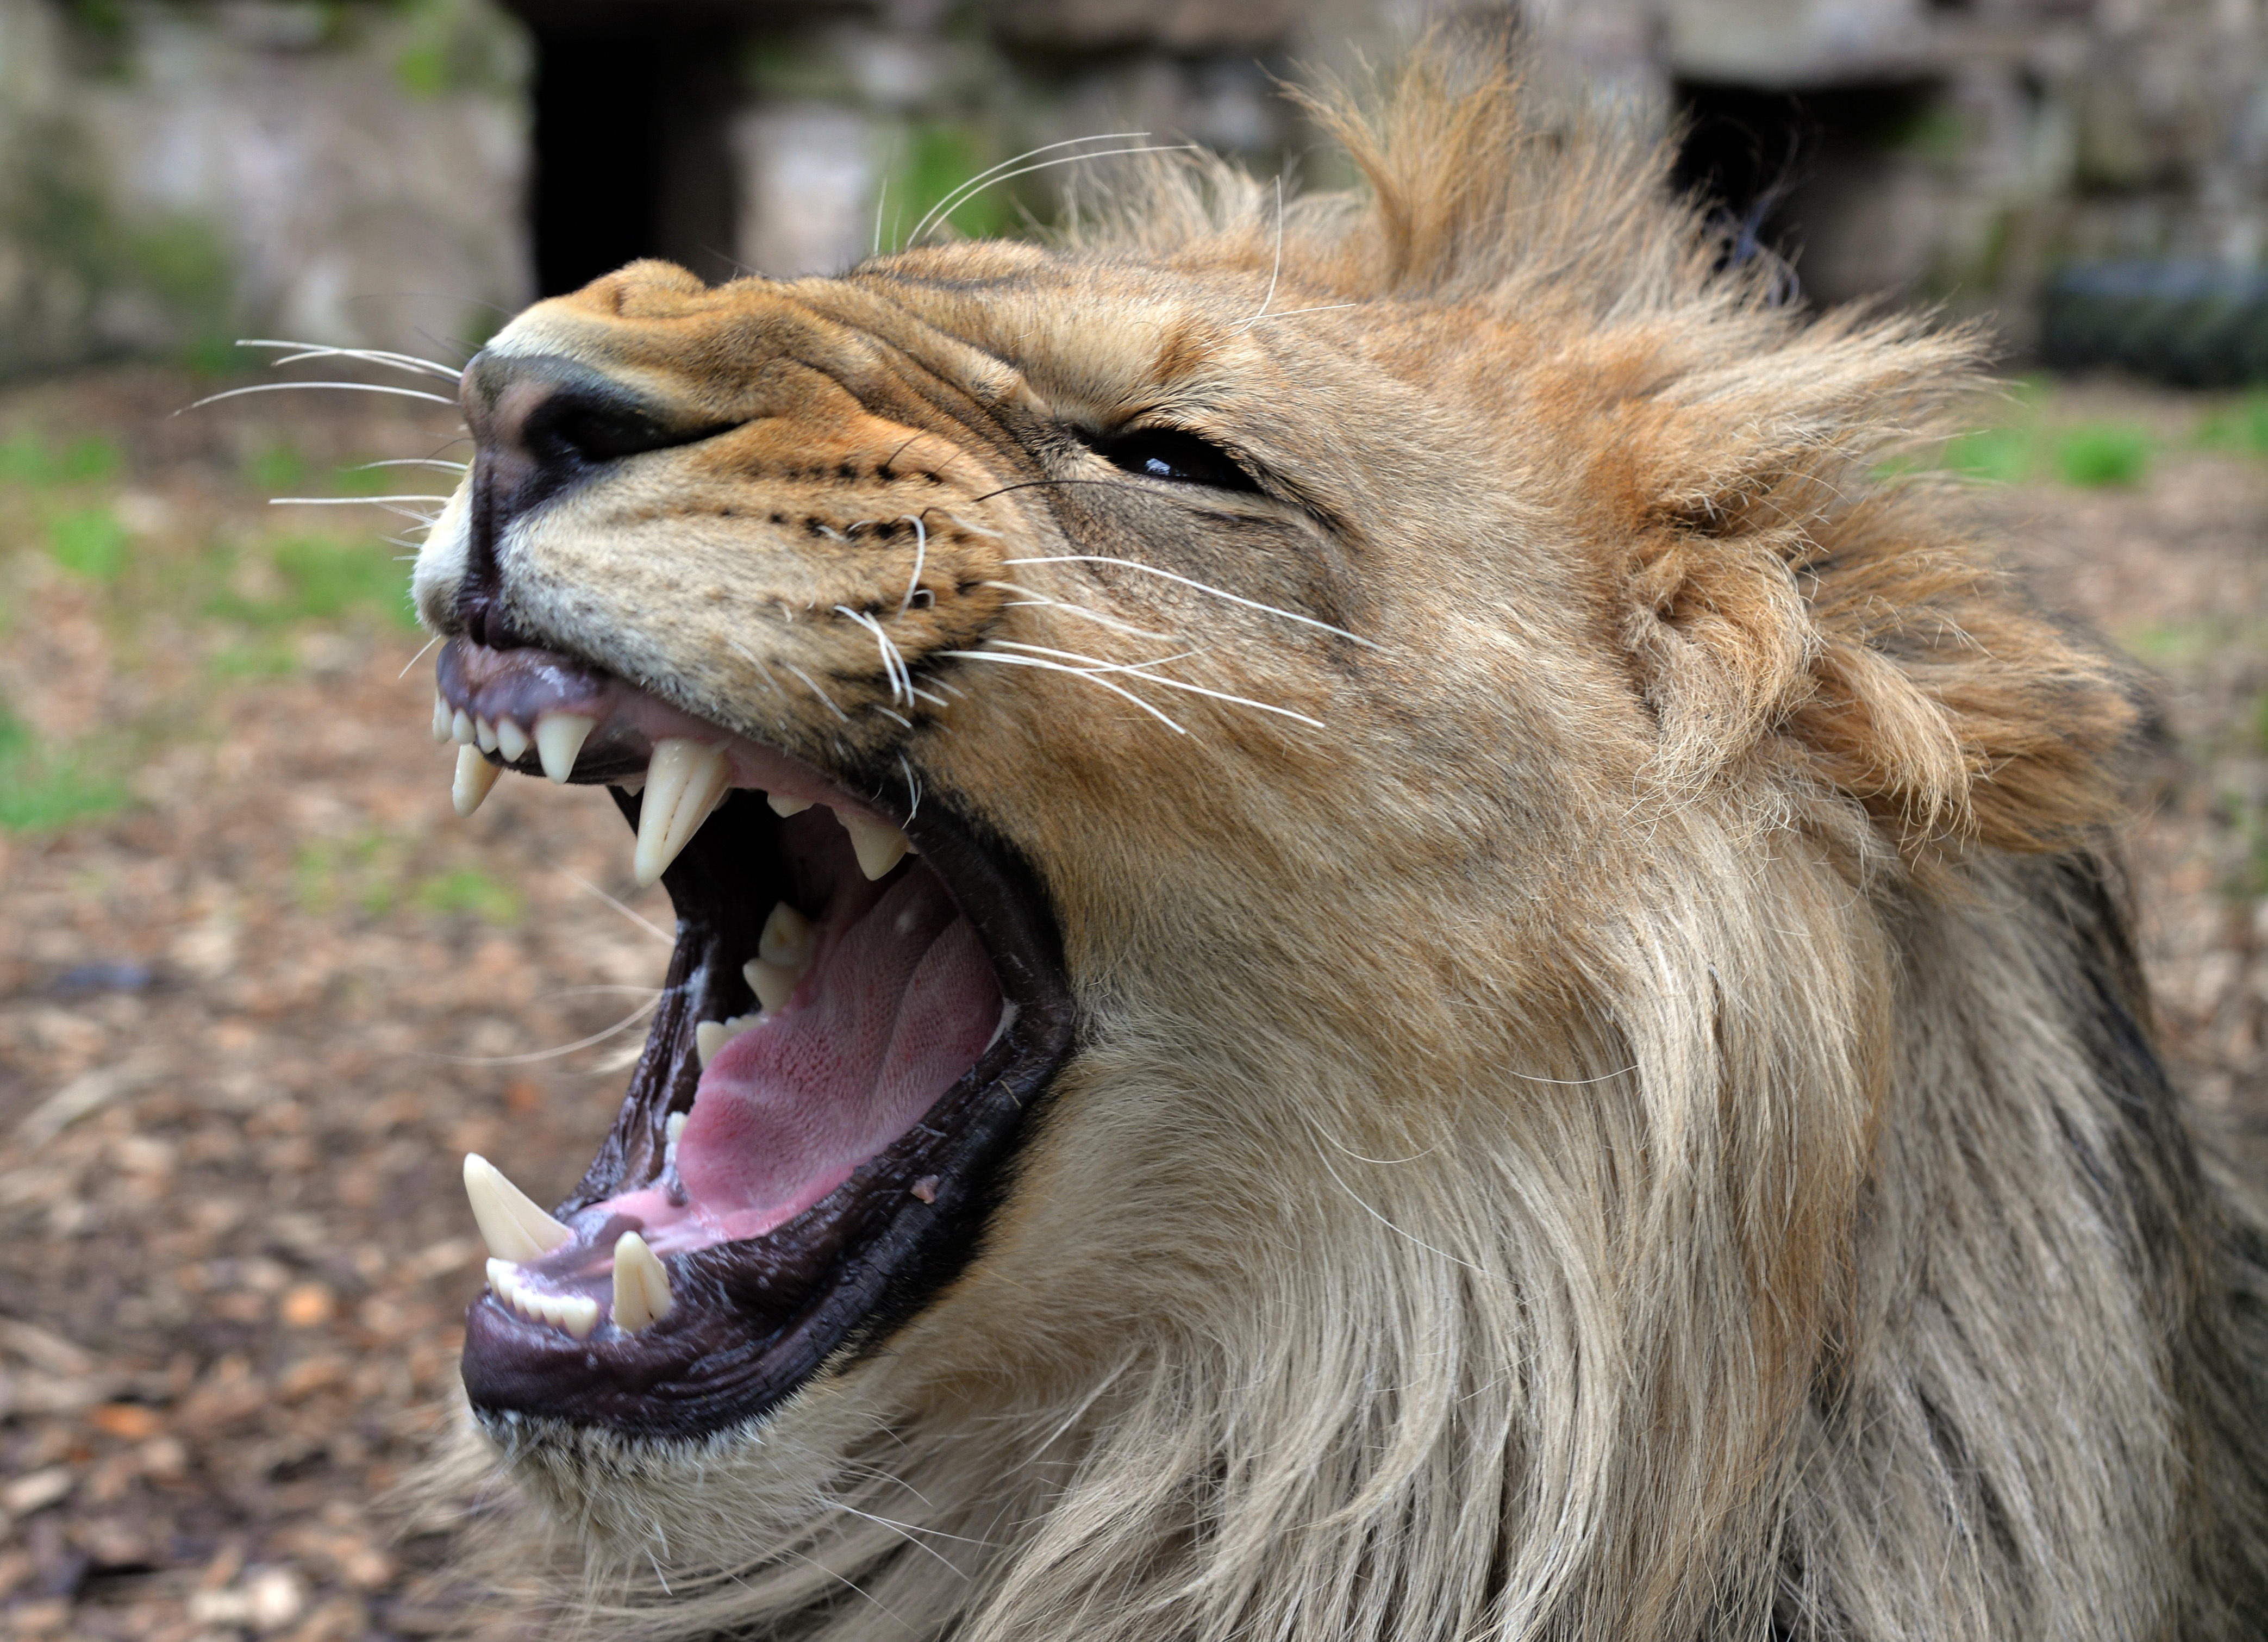 Poachers eaten by lions after sneaking onto South African game reserve